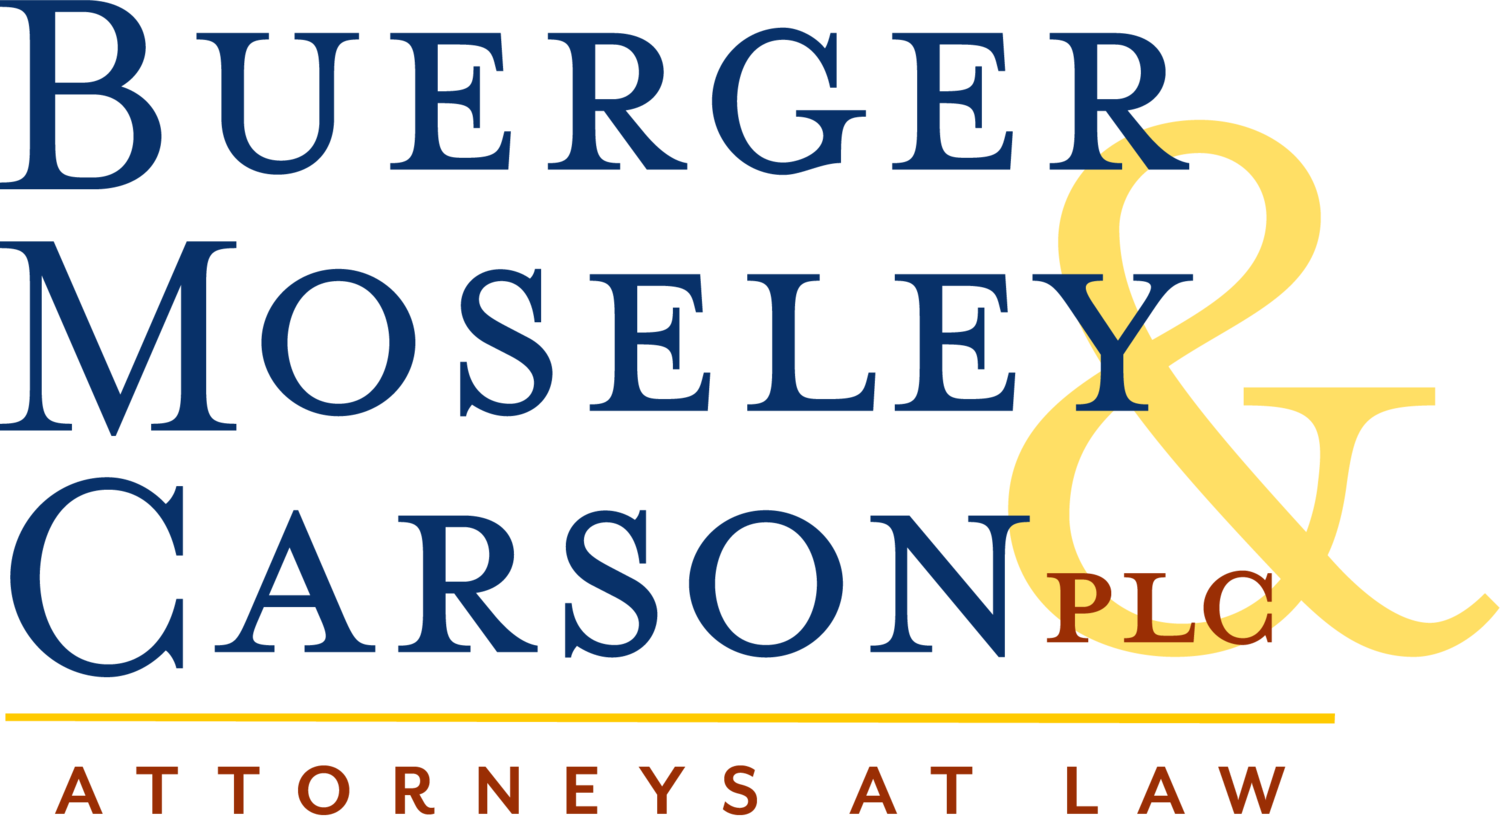 Buerger Mosely  Carson